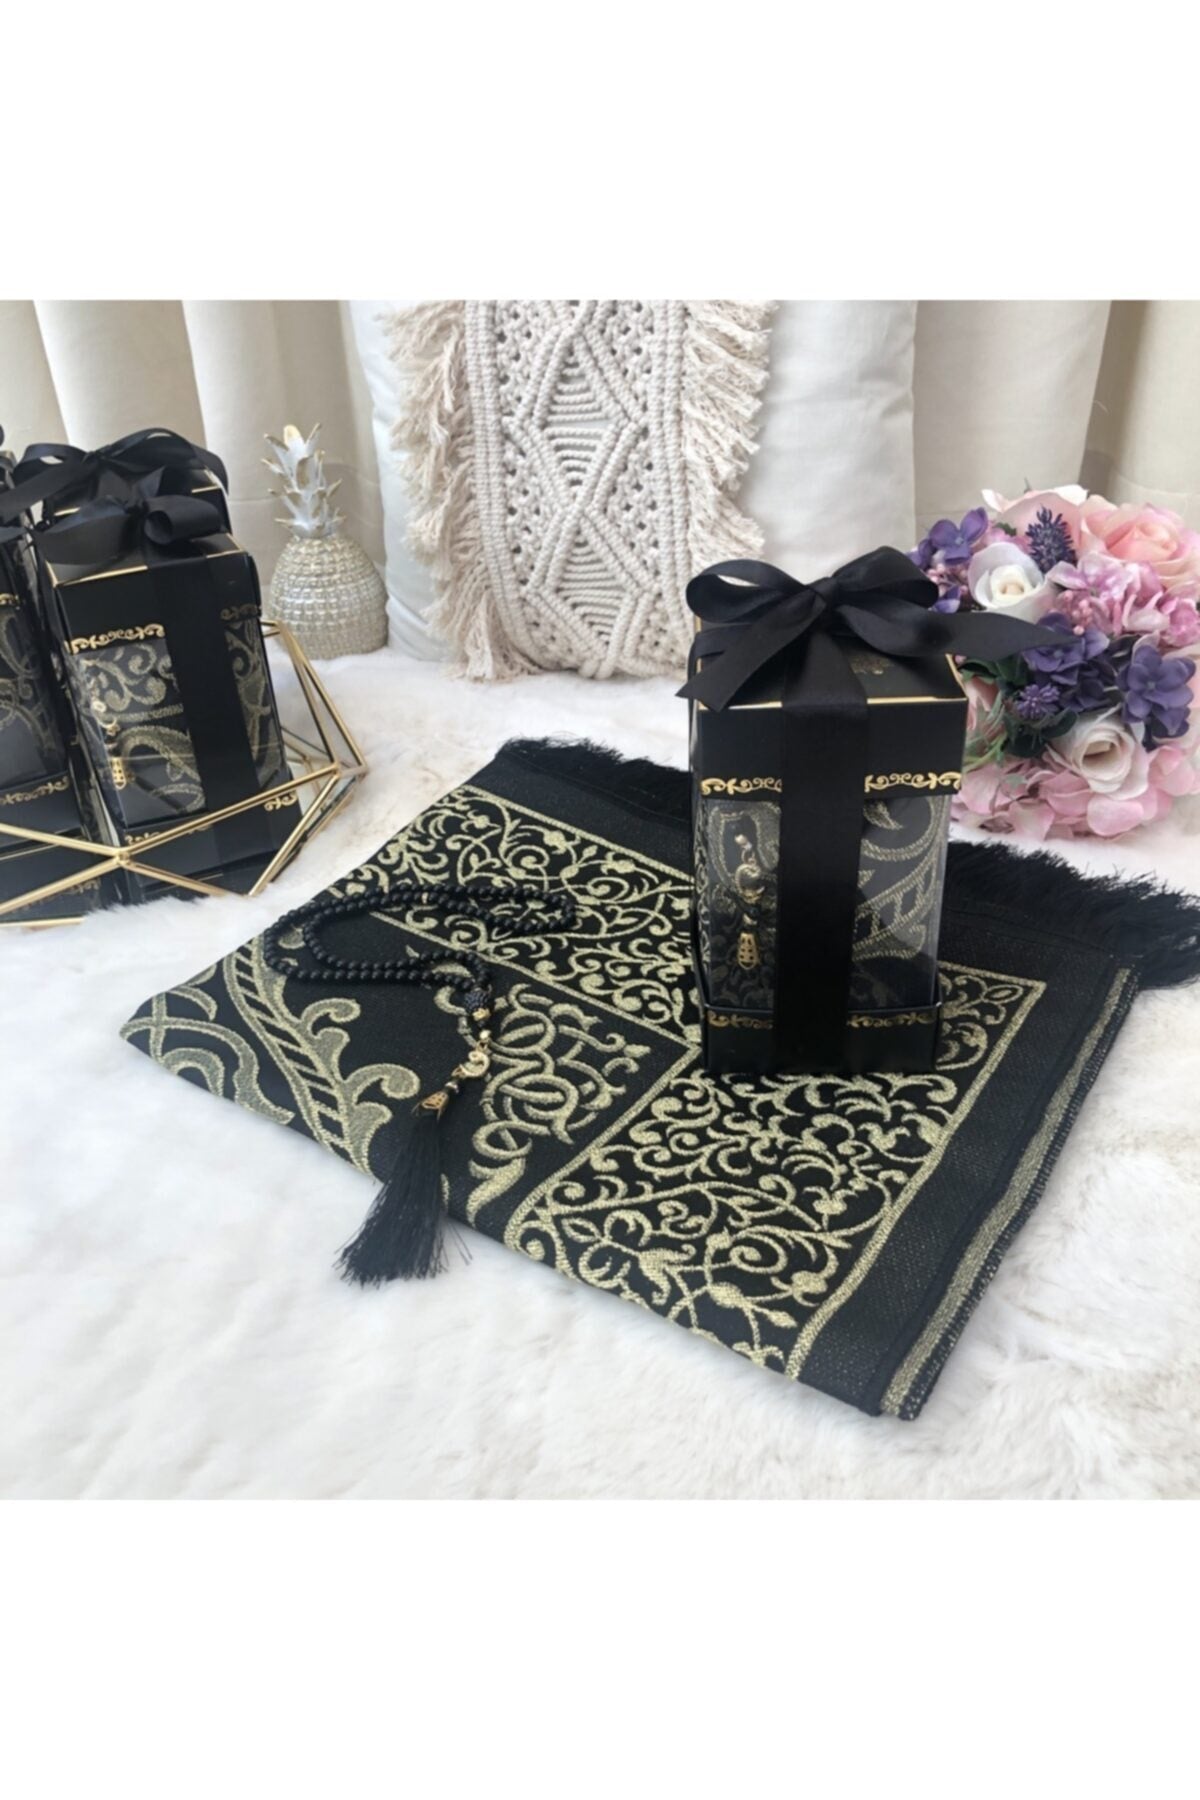 2 Piece Prayer Rug Set 1 Rosary 1 Prayer Rug Islamic Gift Set for Prayer to Muslims 5 Different Colors